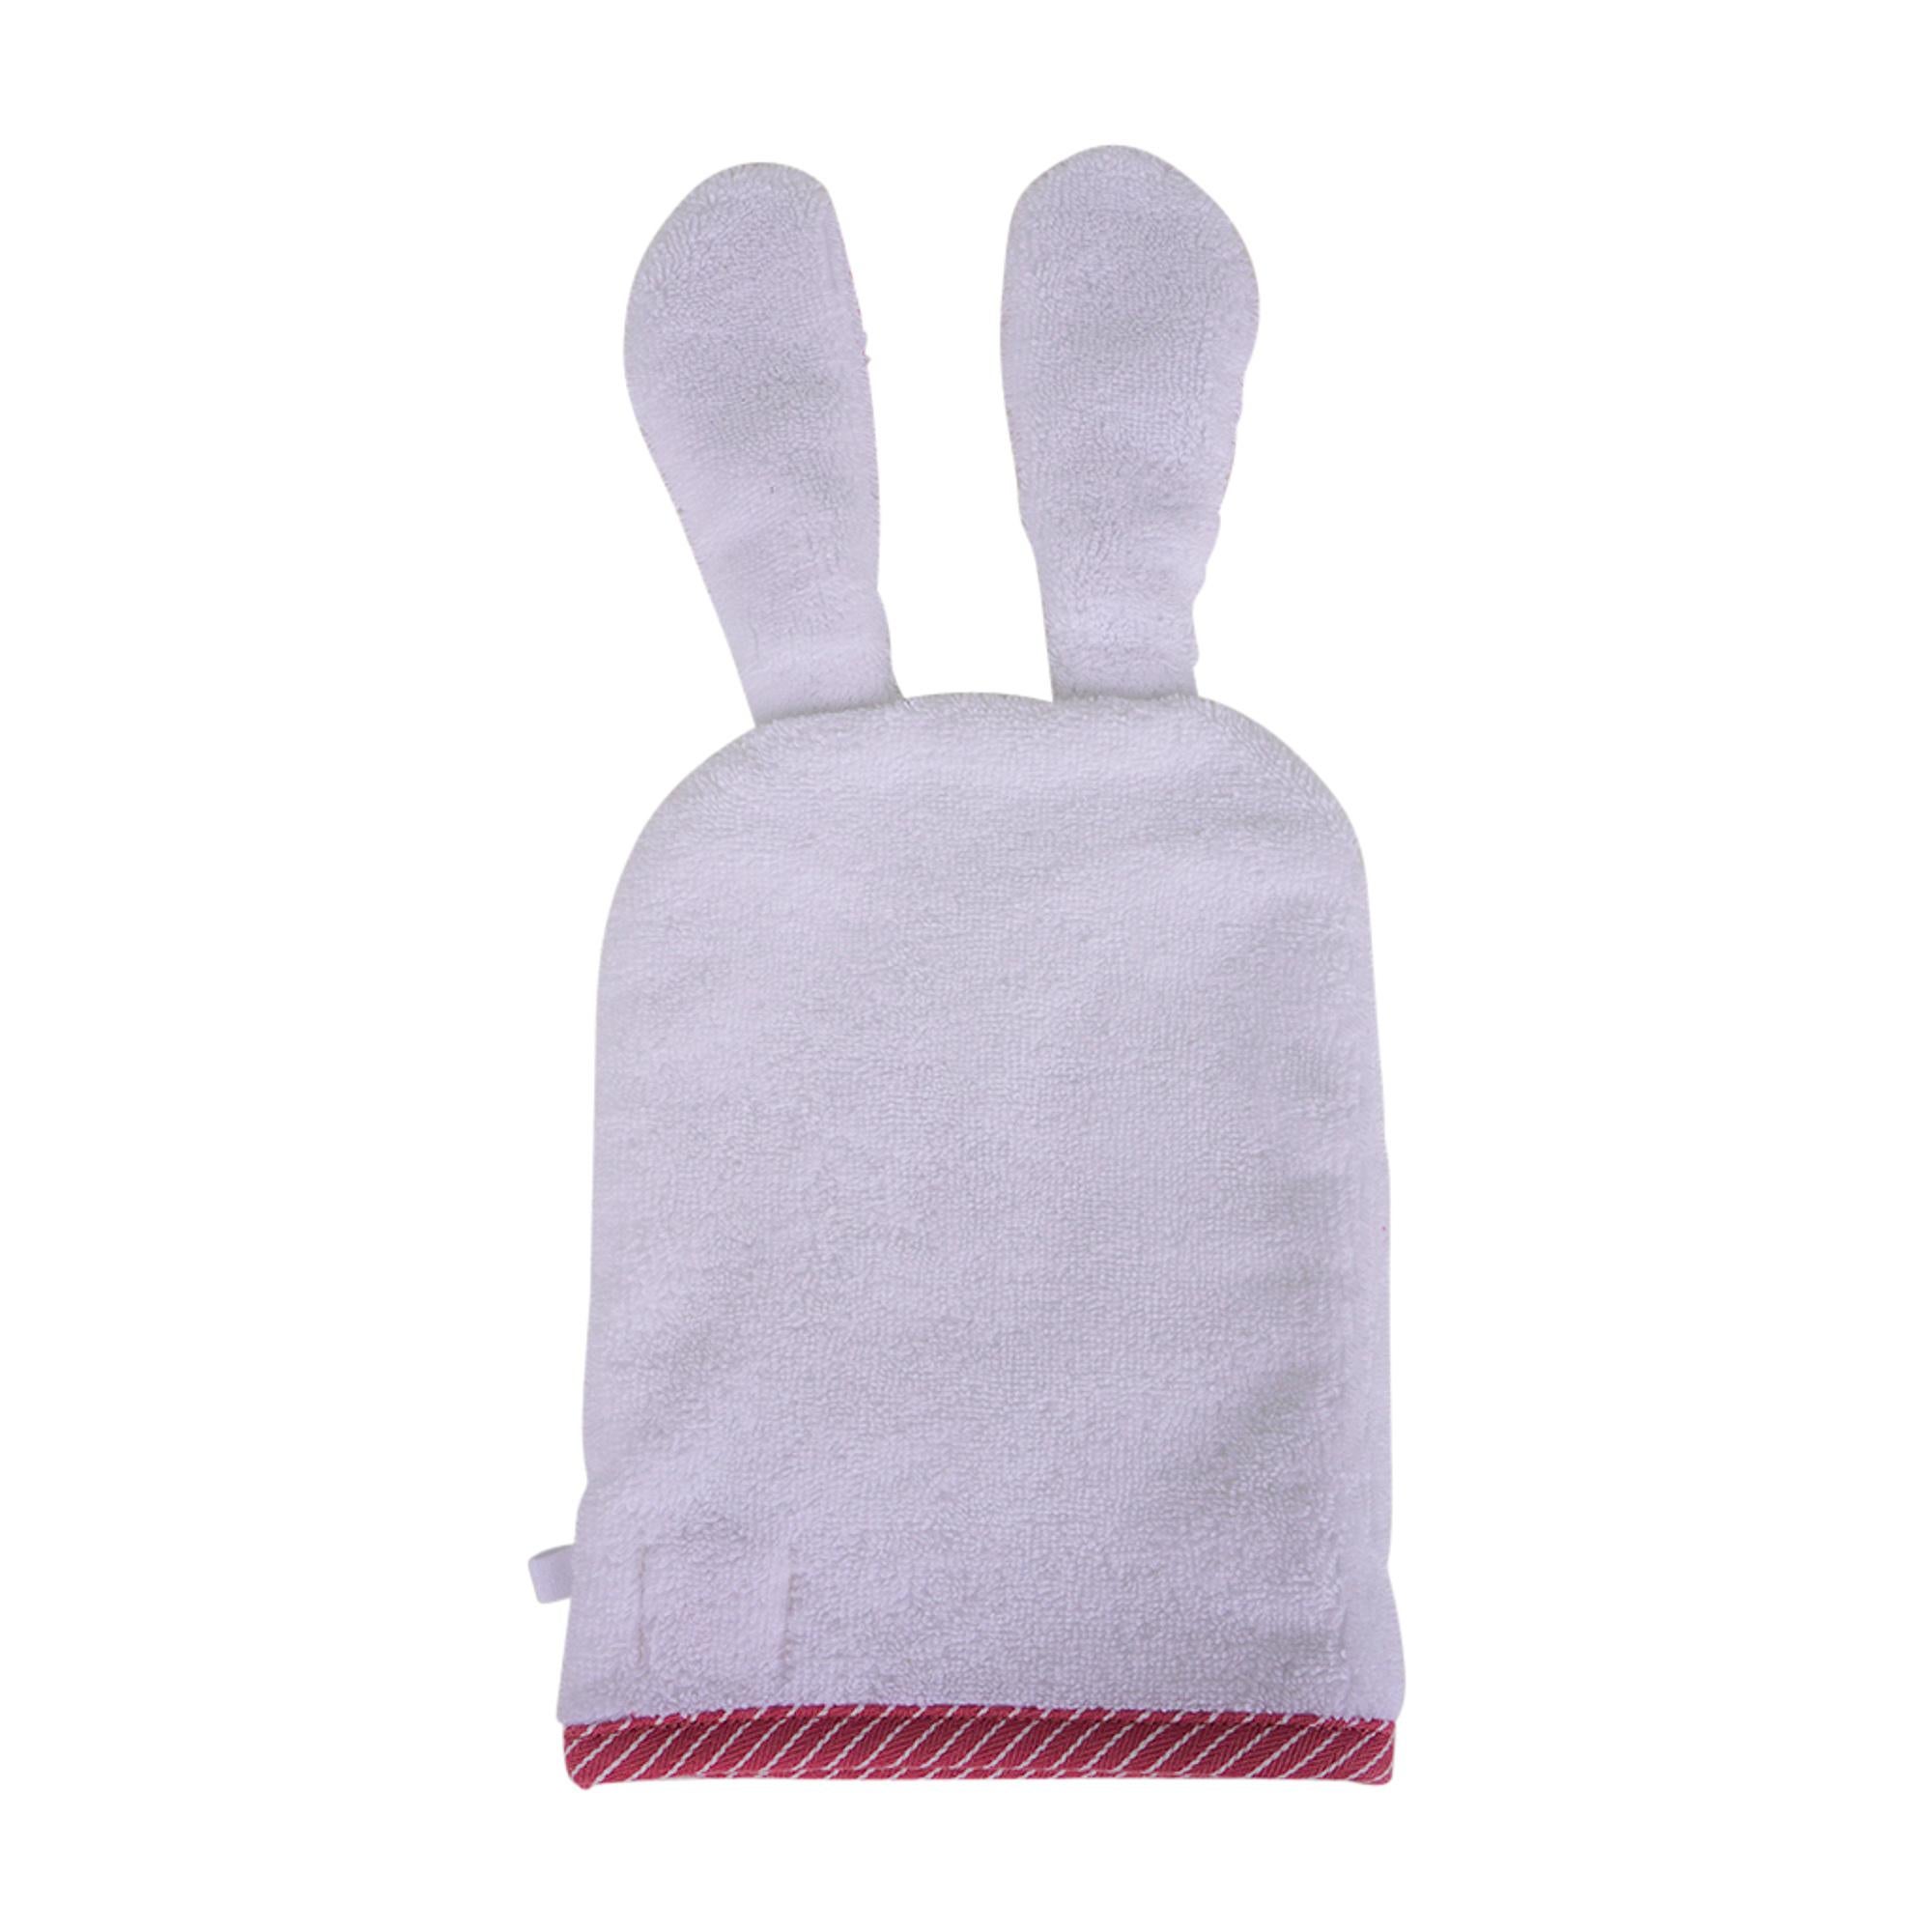 Hermes Passe- Passe Rabbit Washcloth Figue Terry Cotton For Baby In New Condition For Sale In Miami, FL